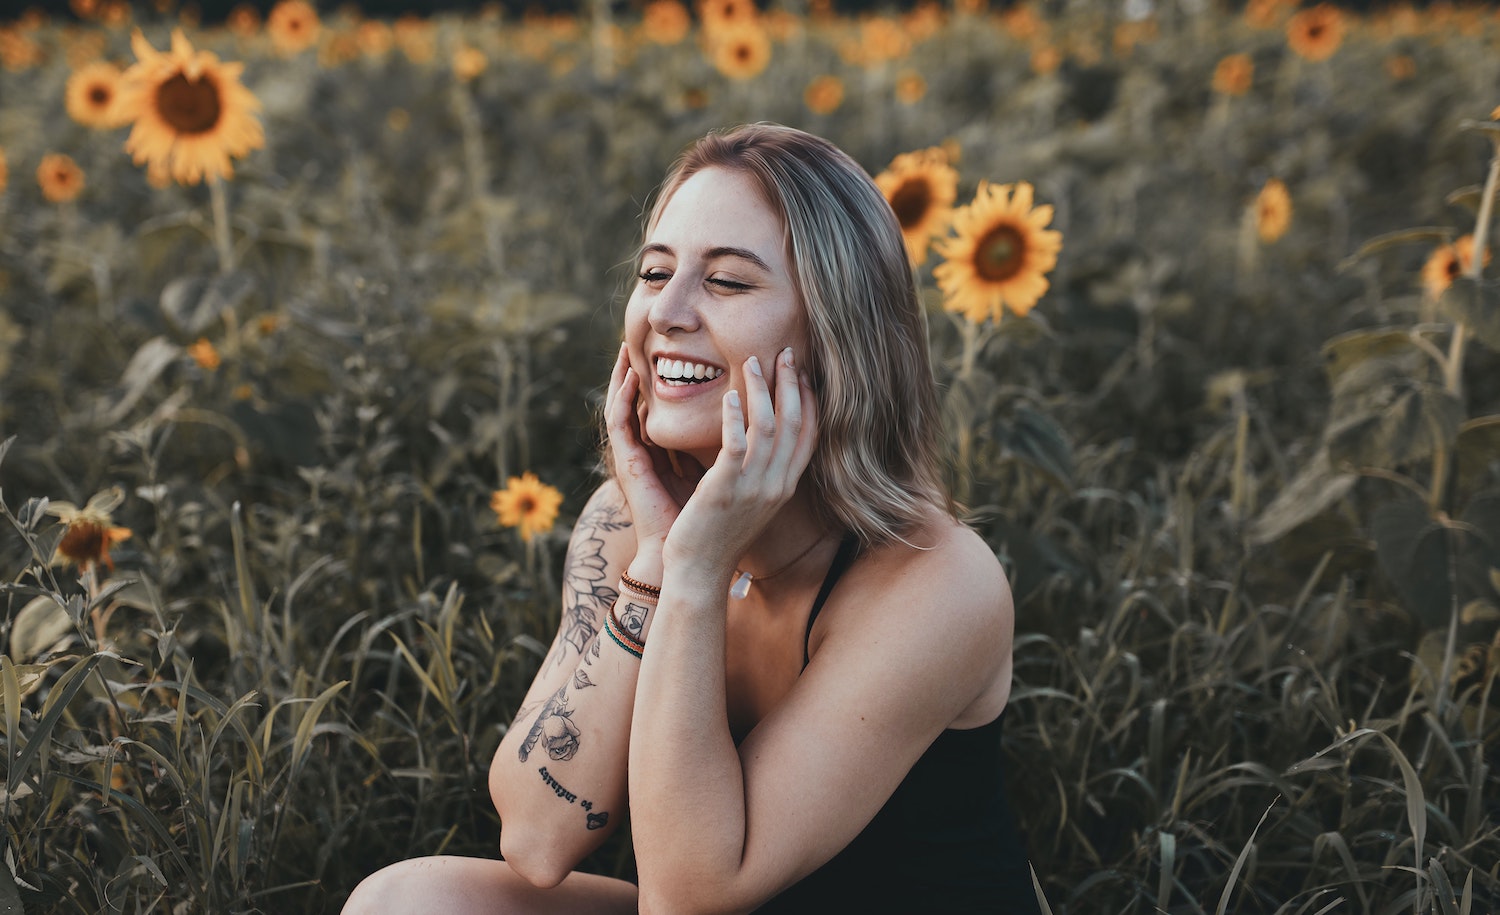 A sensitive person (woman) happy and smiling in a field of sunflowers